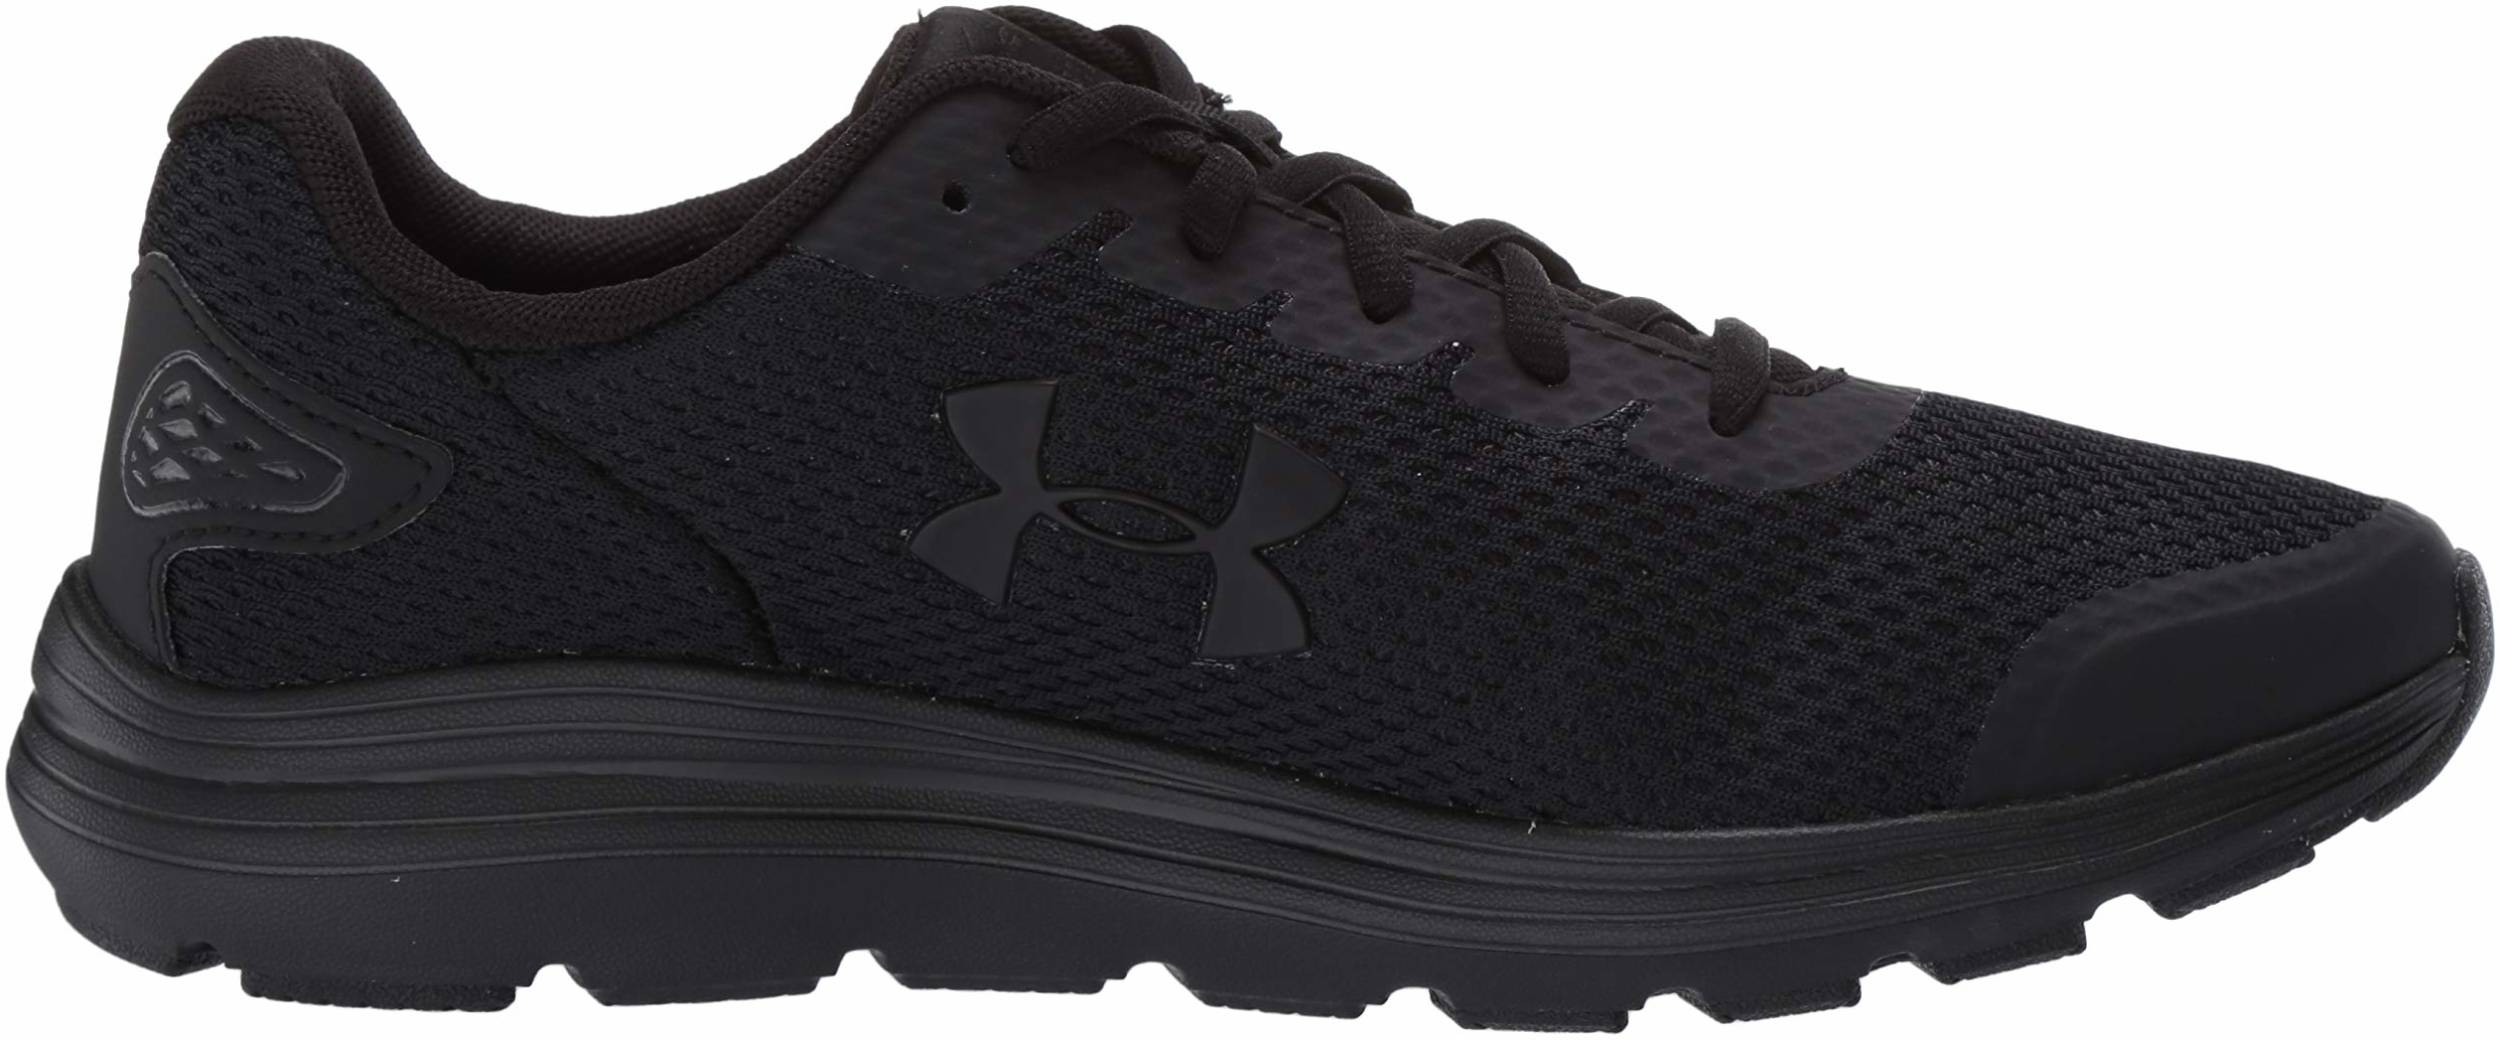 under armor charged running shoes